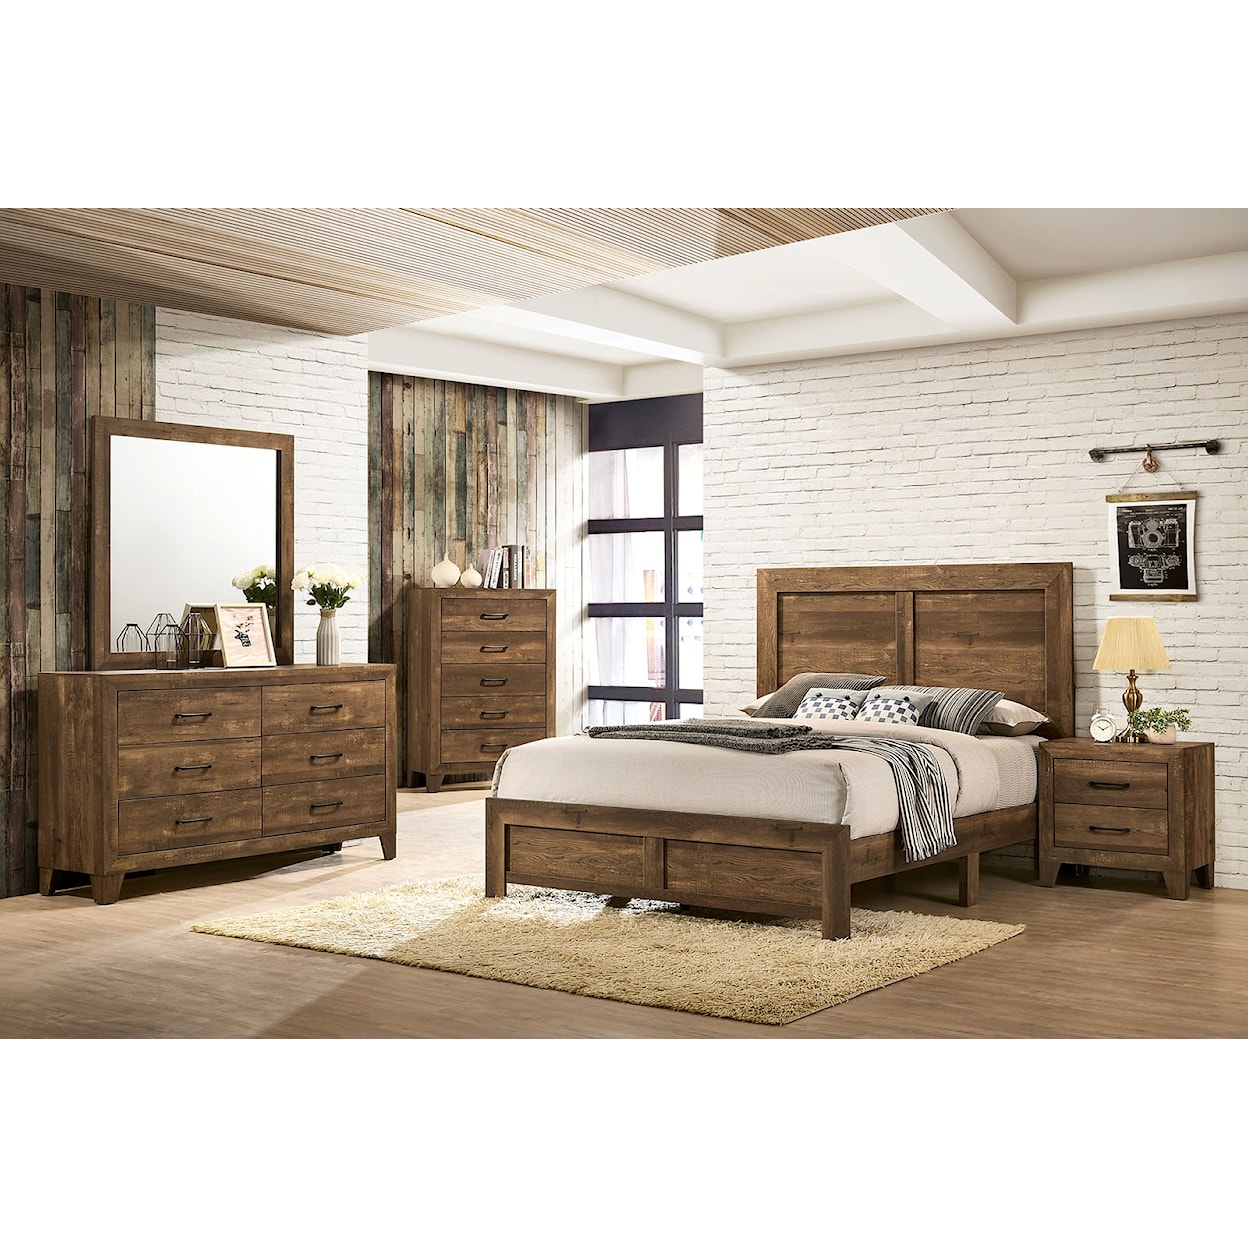 Furniture of America Wentworth Queen Bedroom Group 